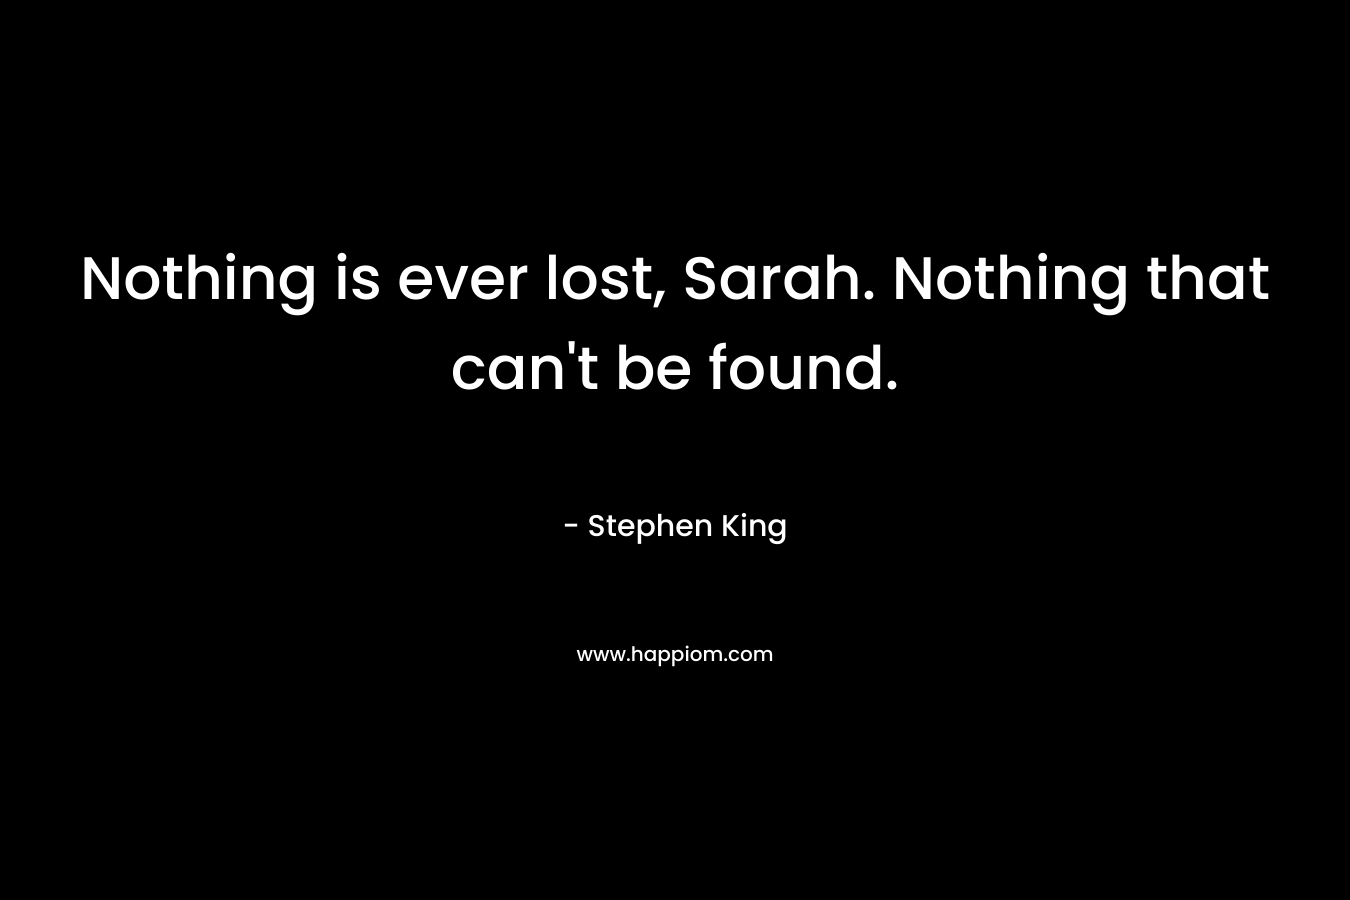 Nothing is ever lost, Sarah. Nothing that can't be found.